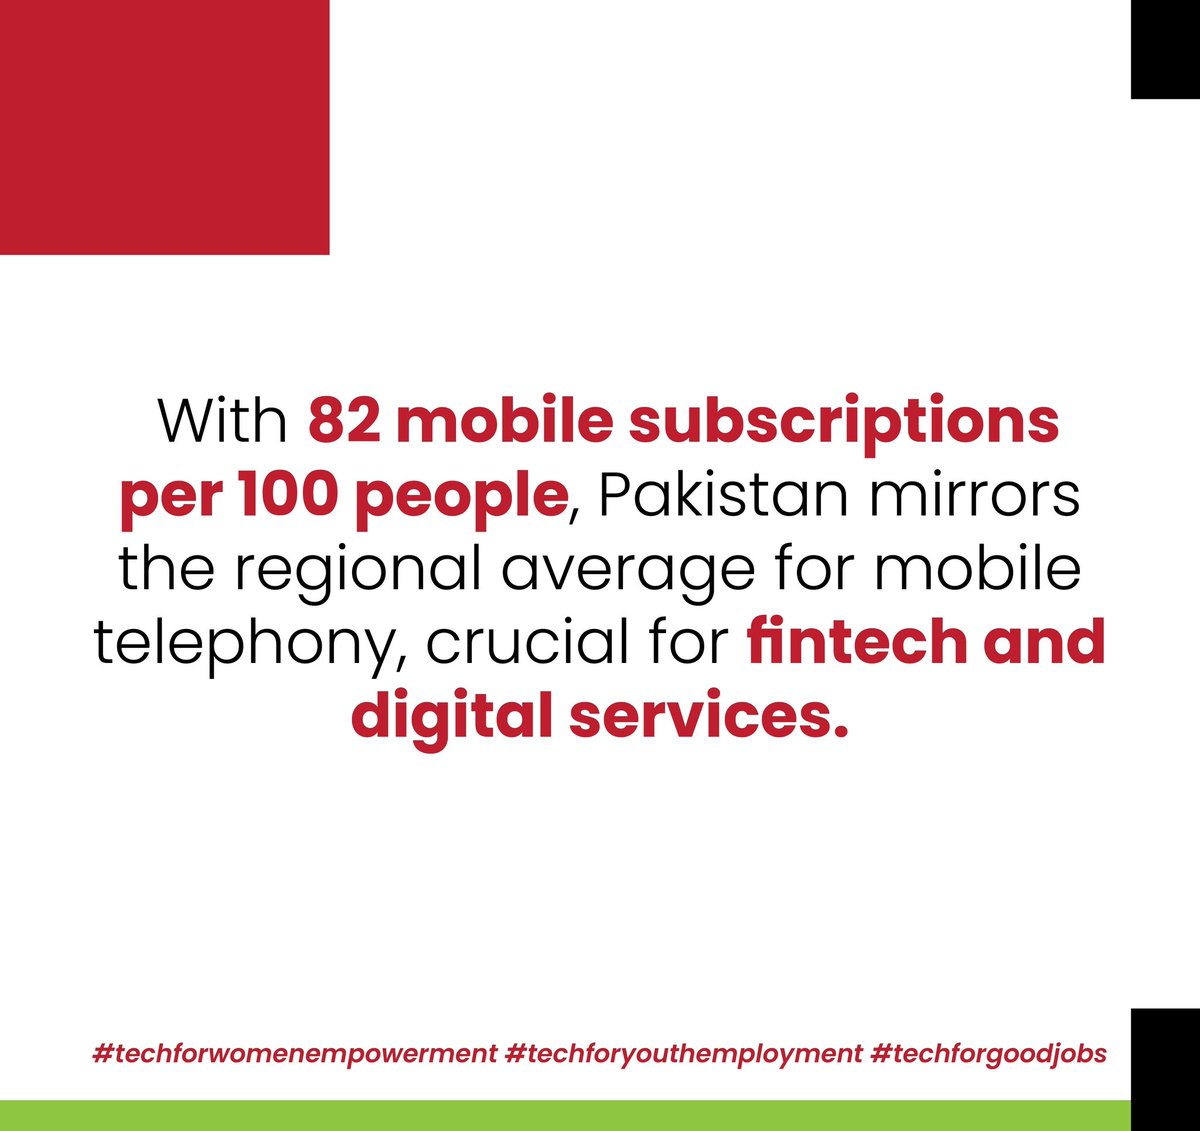 With 82 mobile subscriptions per 100 people, Pakistan's mobile telephony is at par with regional averages, vital for digital services.
#TechForWomenEmpowerment #TechForYouthEmployment #TechForGoodJobs